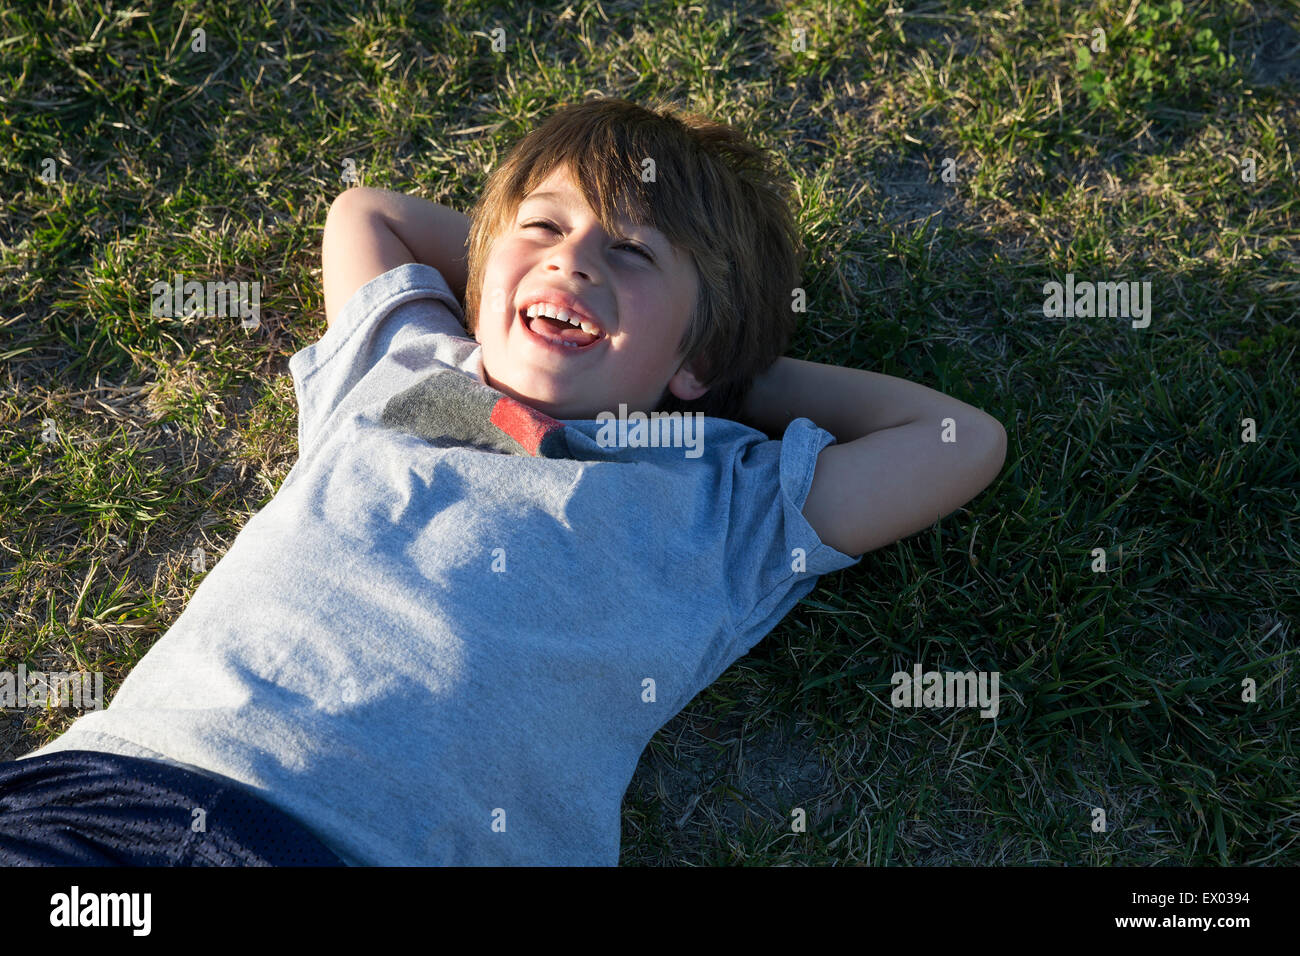 Portrait of boy lying on park grass and laughing Stock Photo